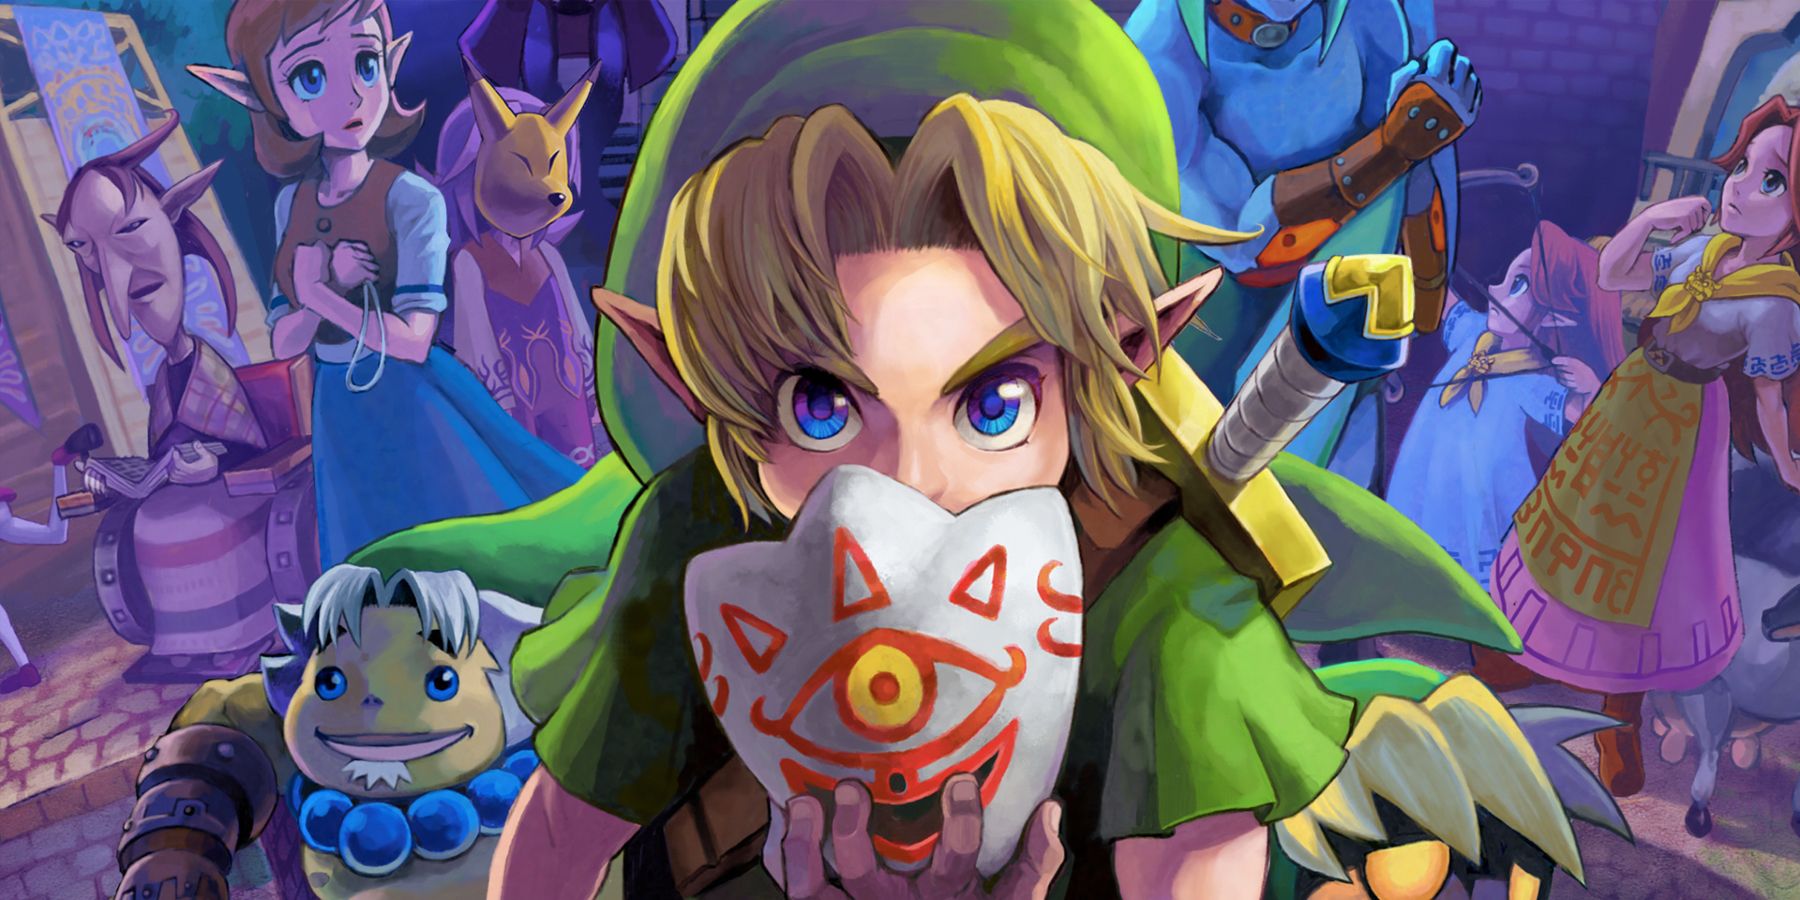 Link in Ocarina of Time and Majora's Mask